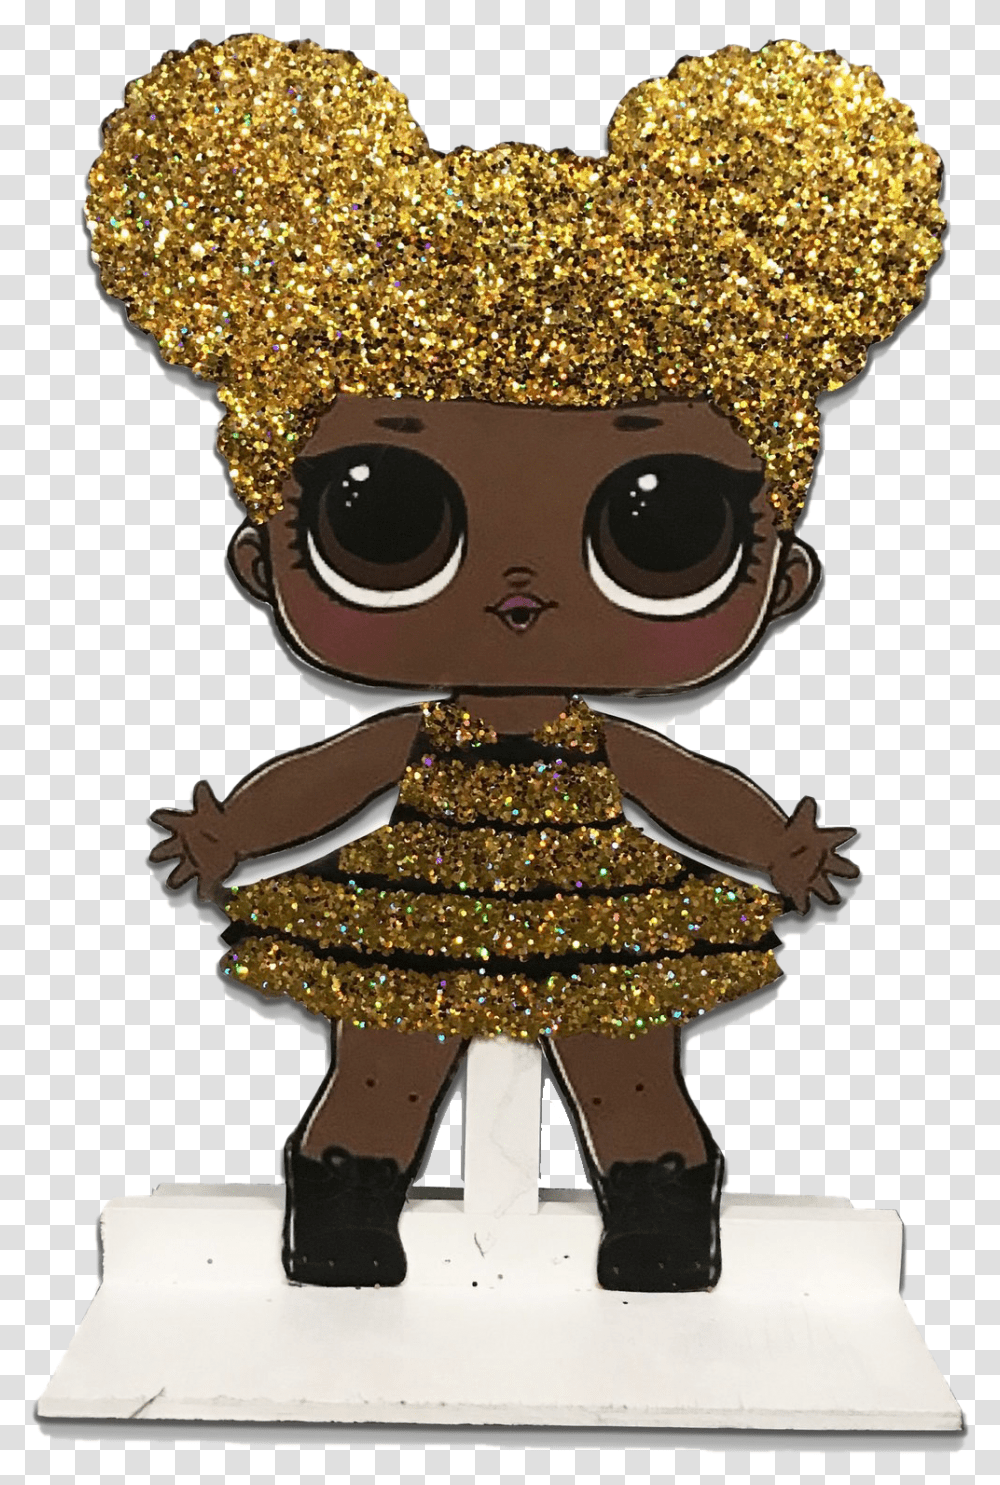 Lol Doll Image File Lol Surprise Dolls Queen Bee, Toy, Jewelry, Accessories, Accessory Transparent Png